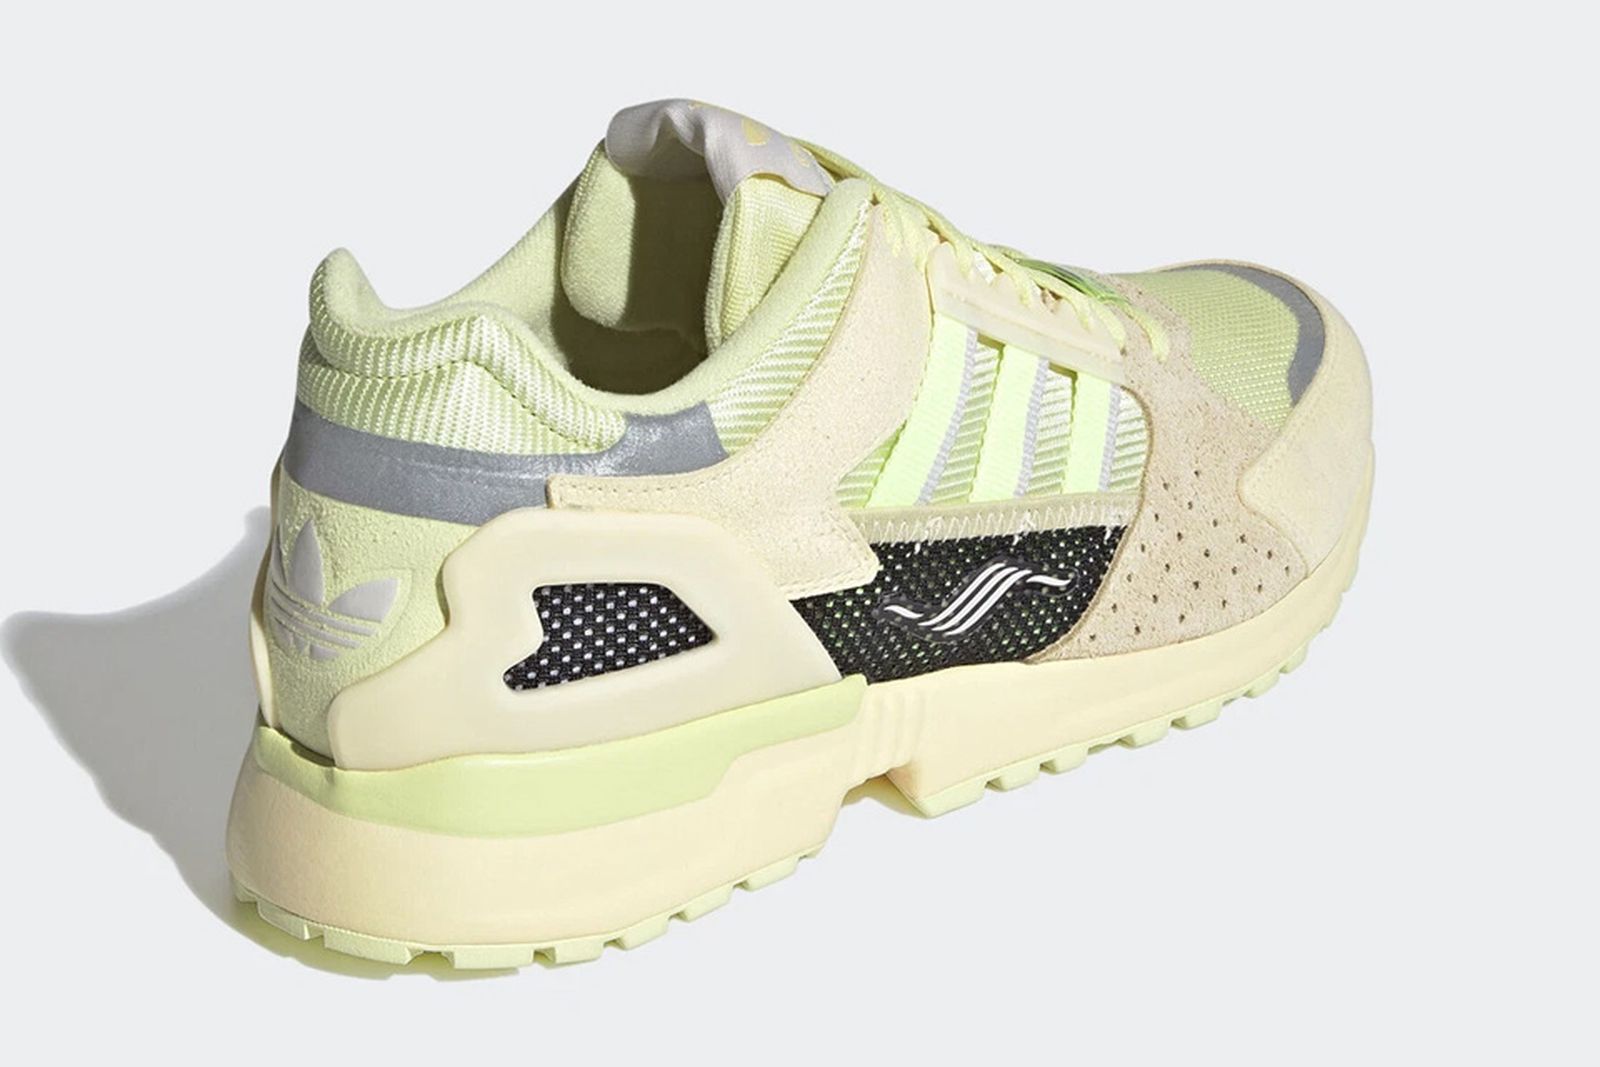 adidas-zx-10000-c-yellow-tint-release-date-price-01